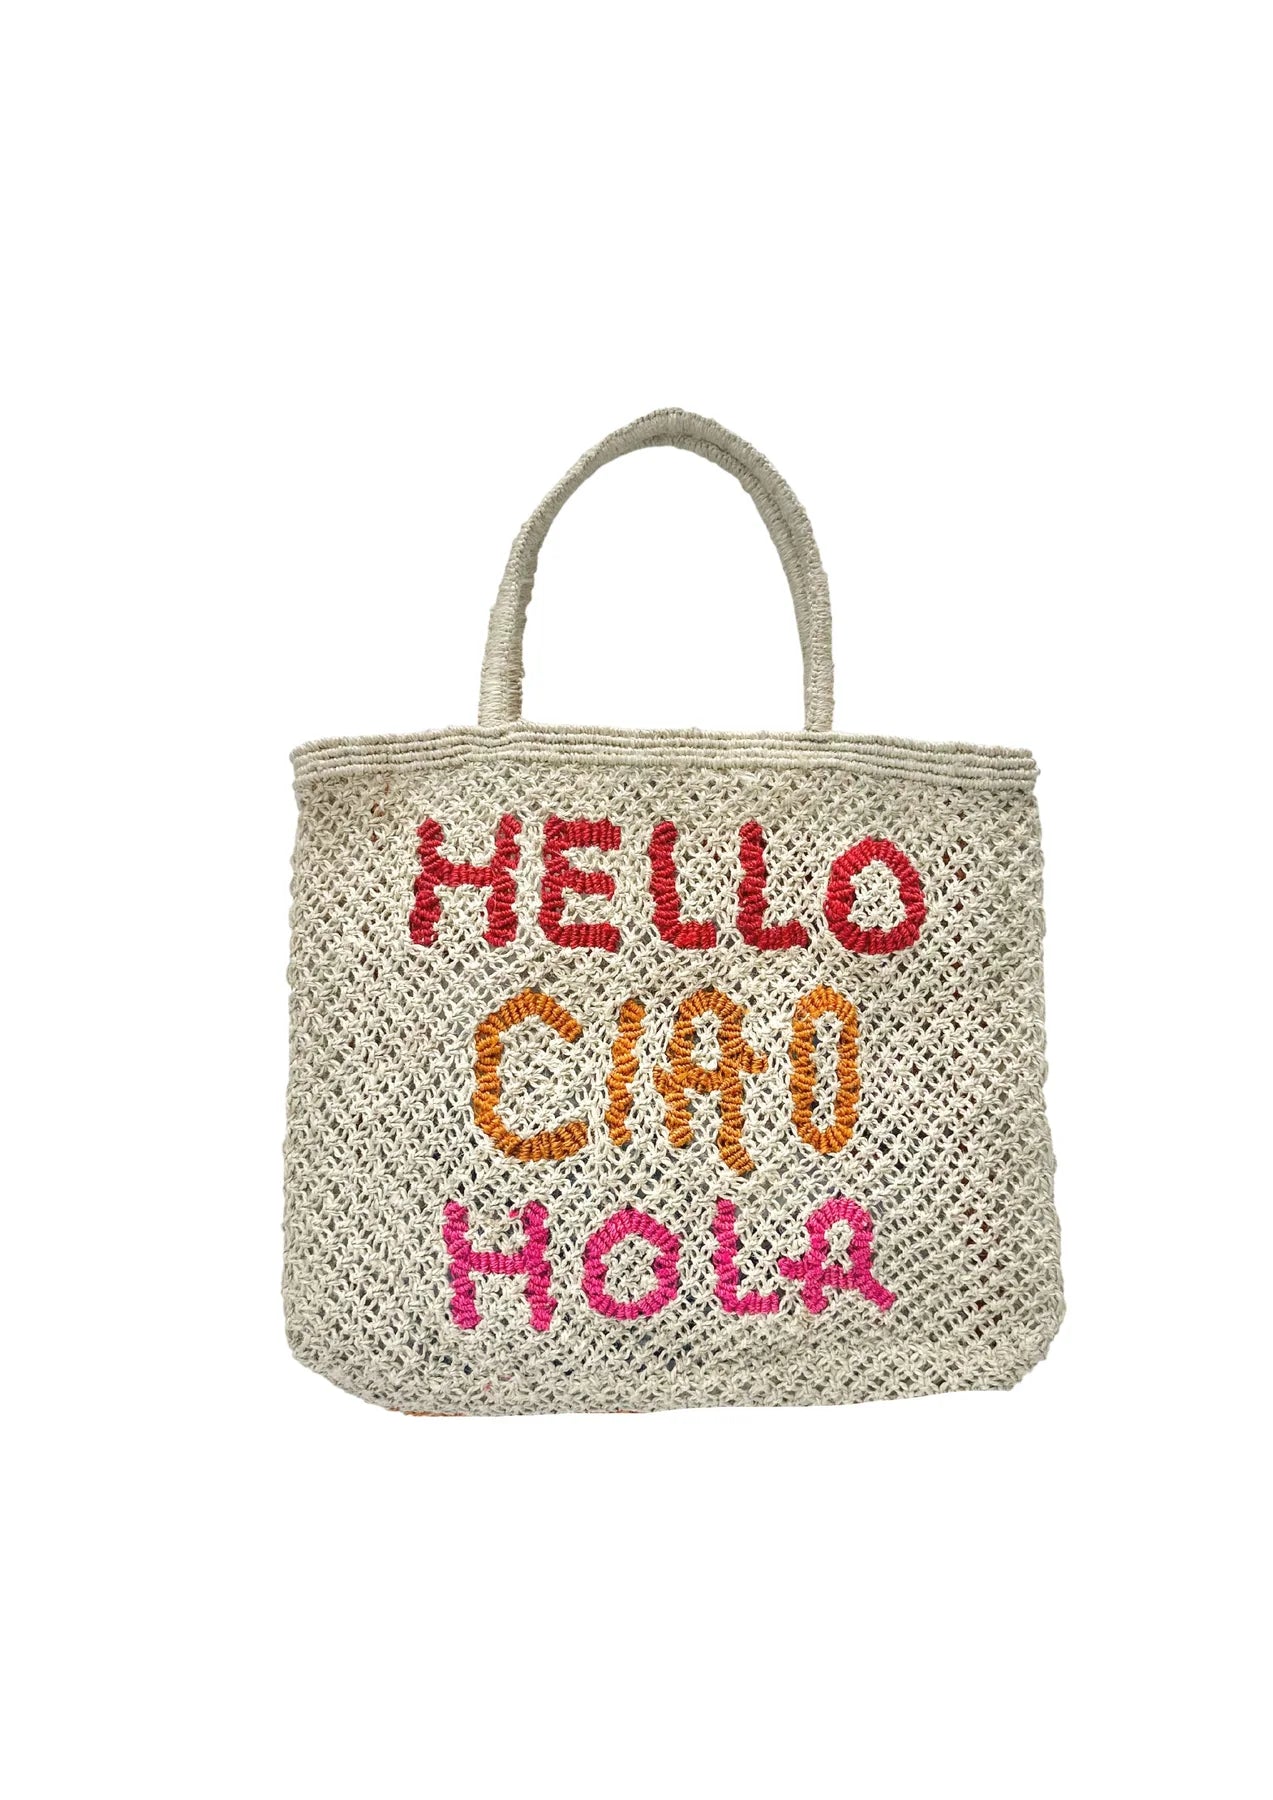 Hello Ciao Hola Bag - LARGE Pink Red and Yellow